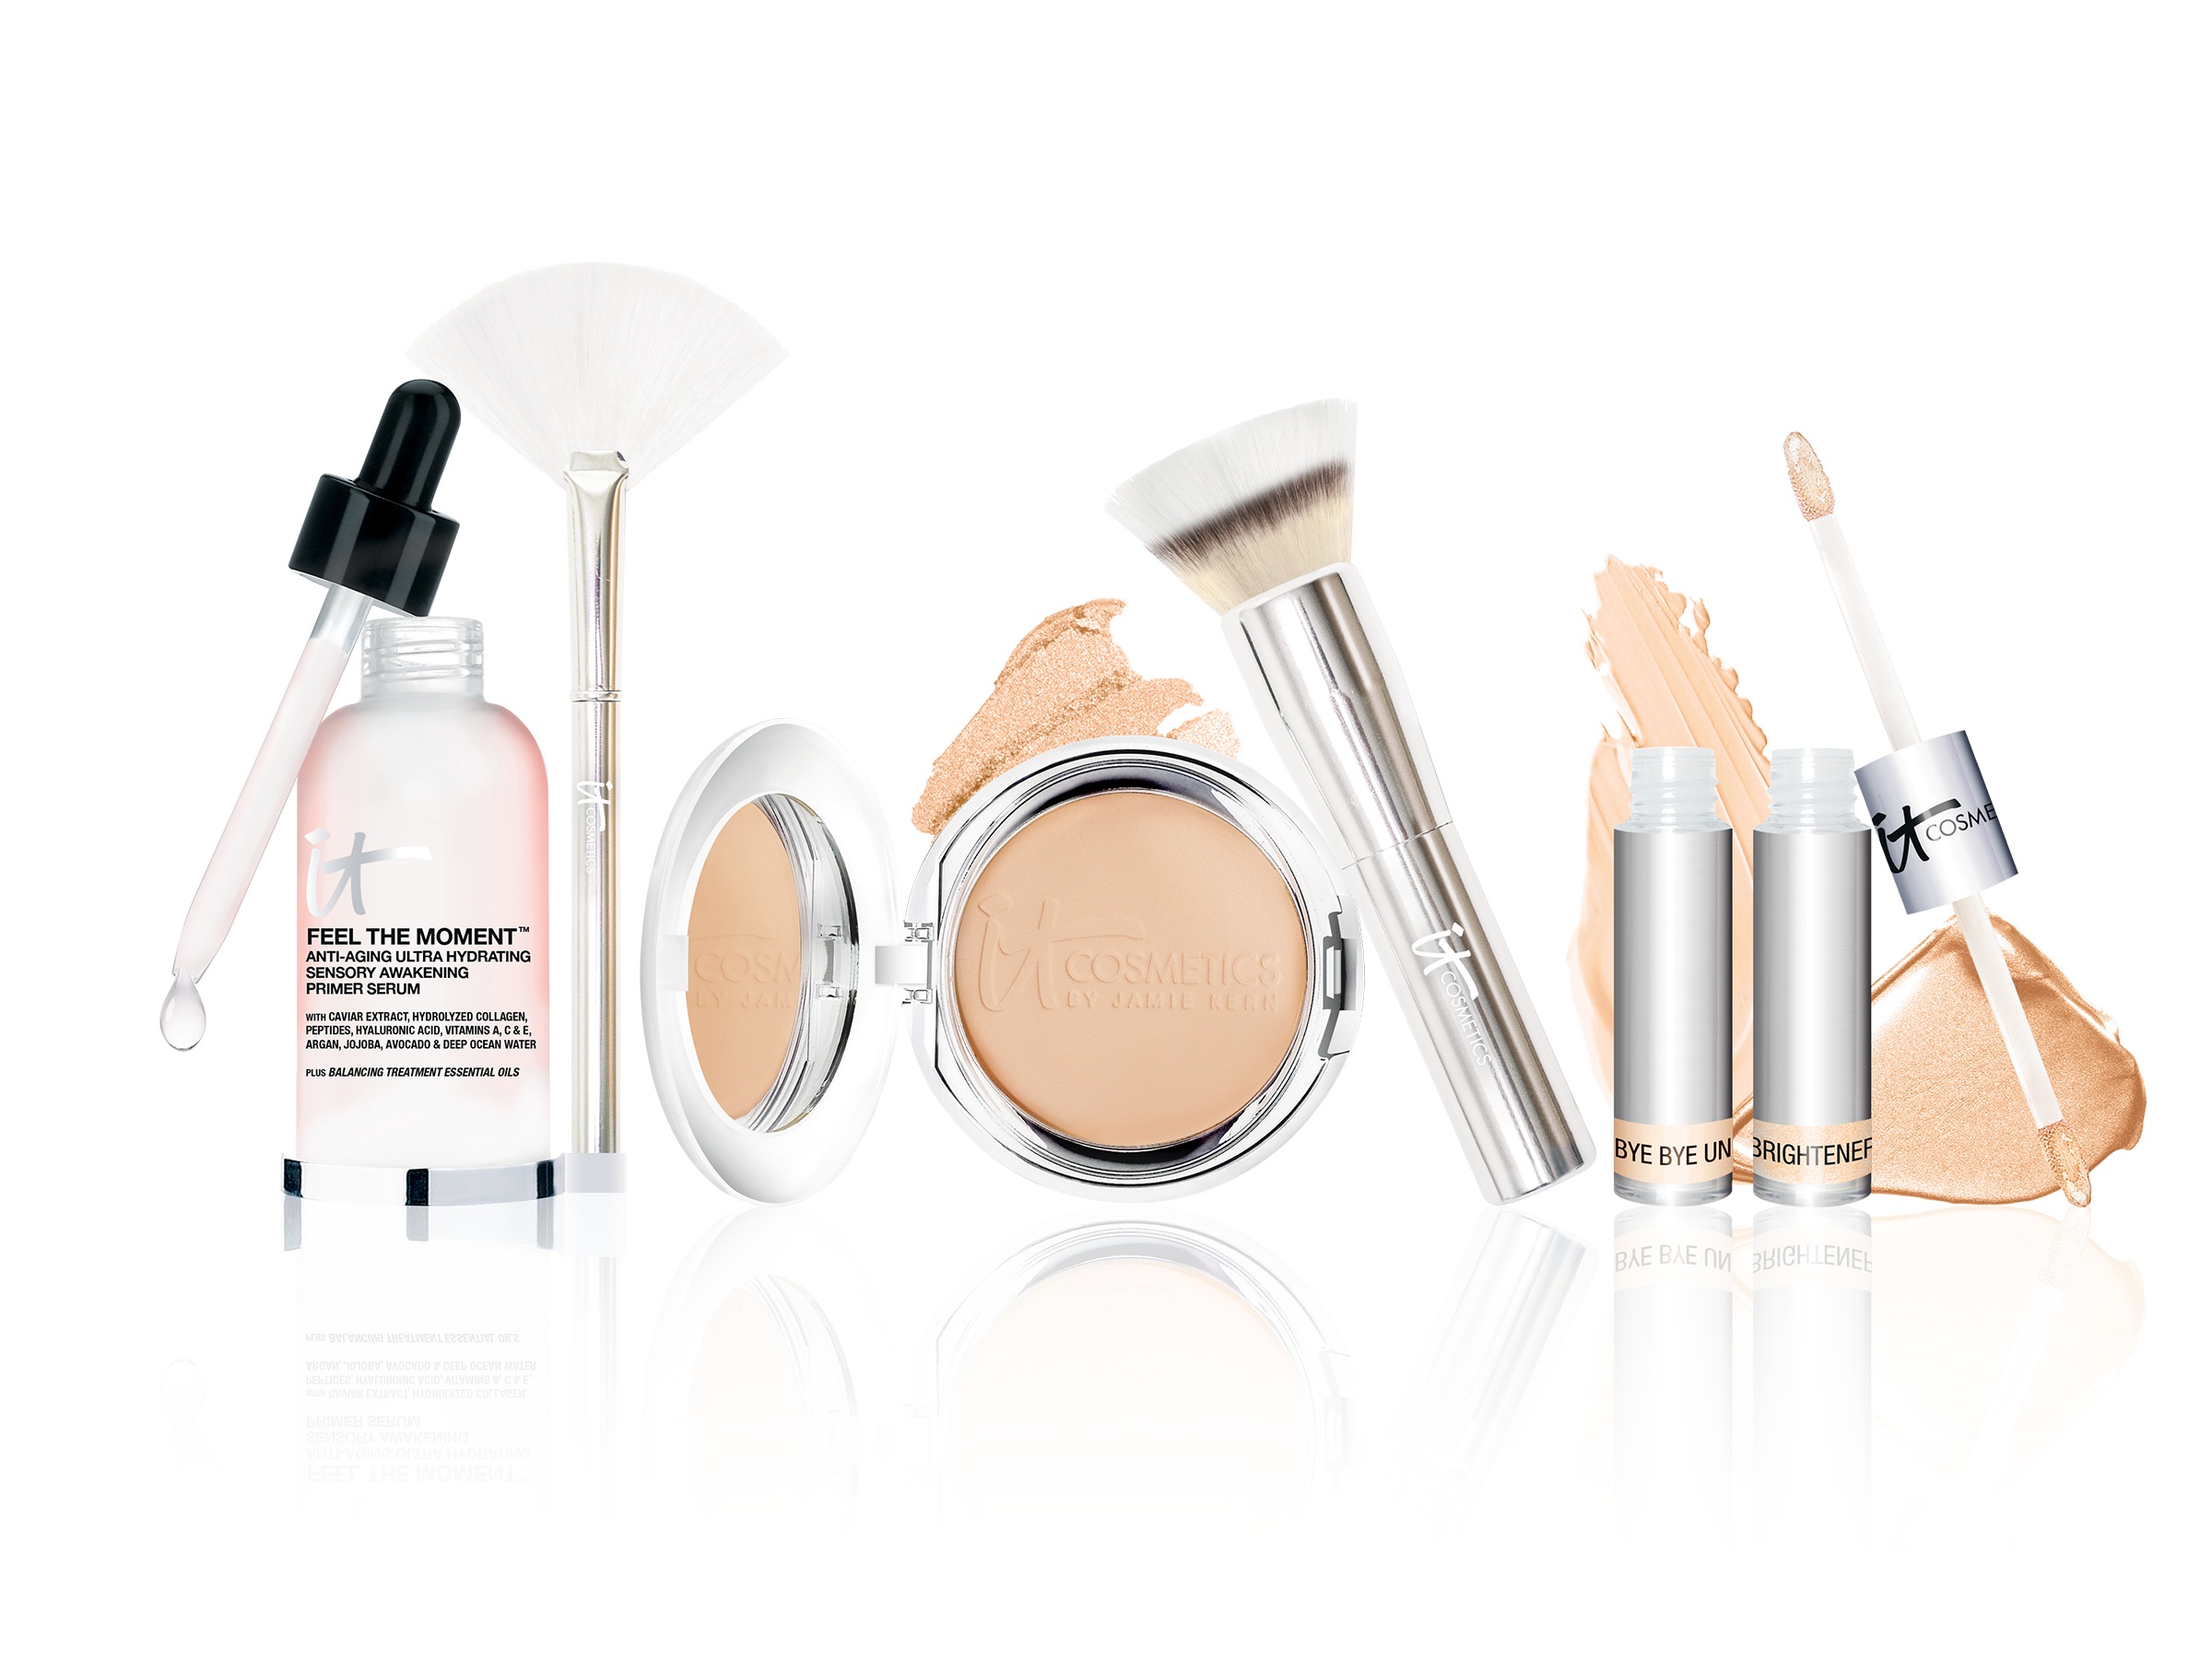 New Year’s Beauty Resolutions – Adding Makeup With a Purpose, iT Cosmetics